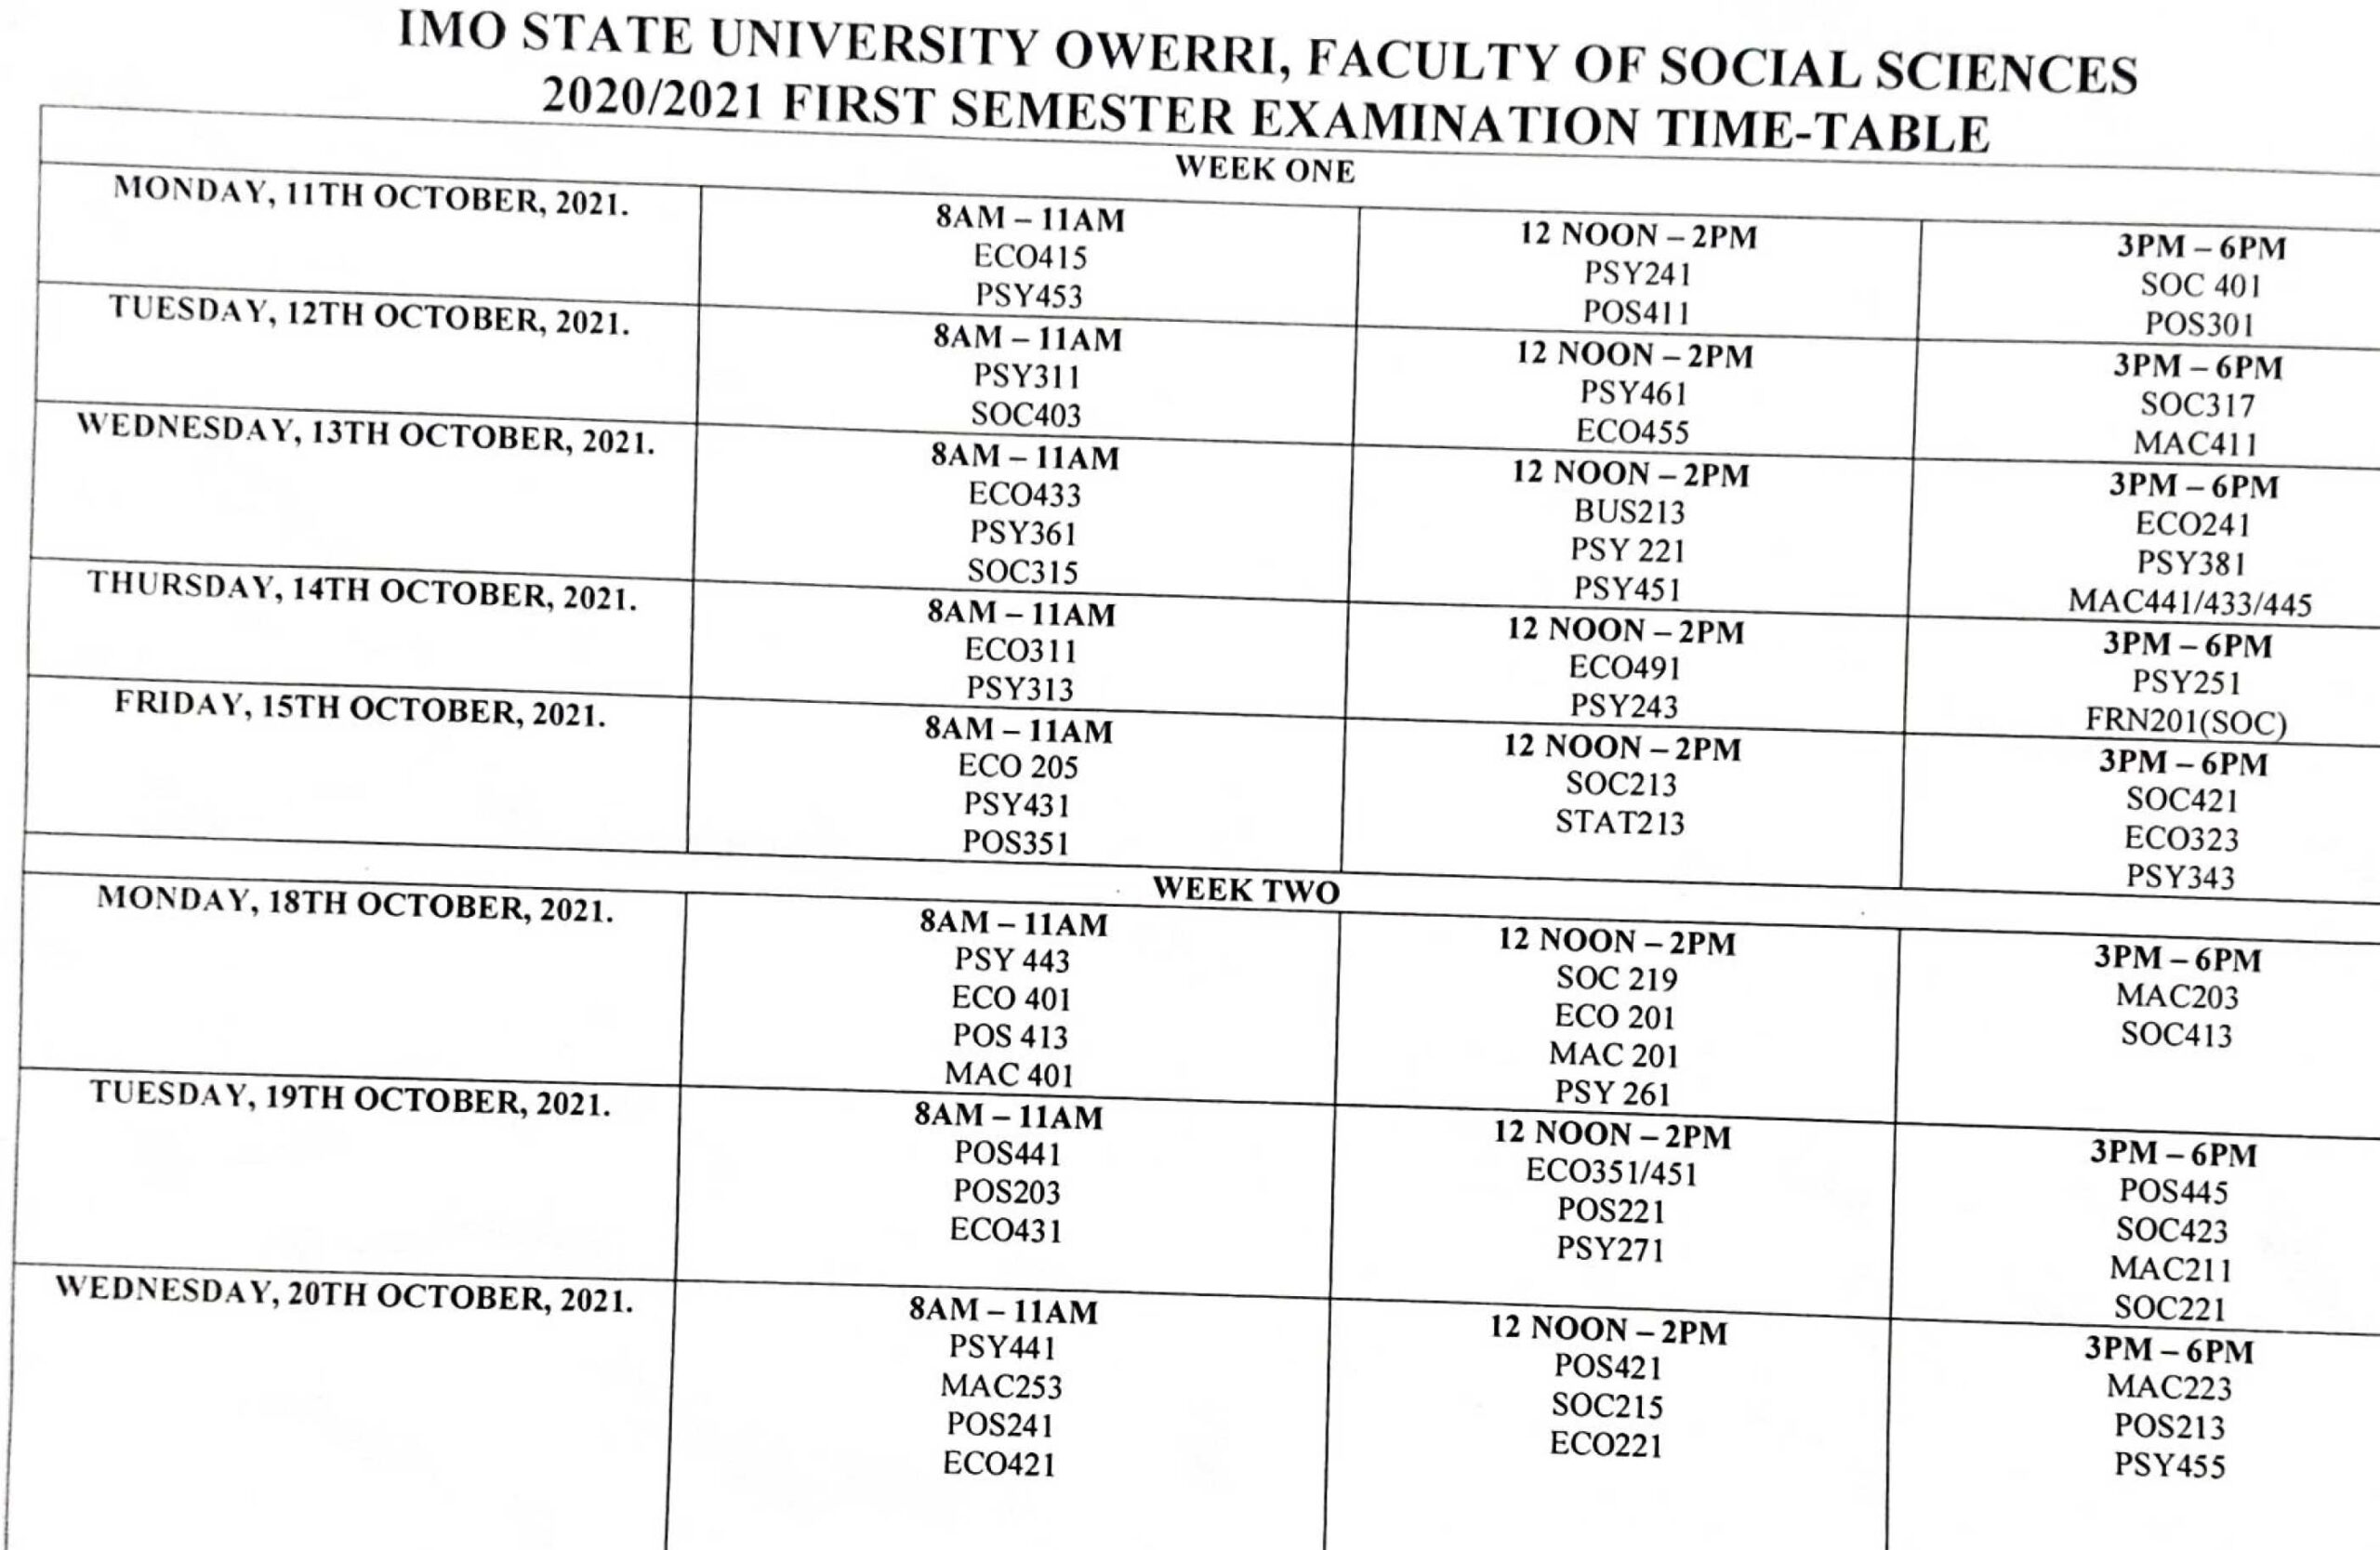 IMSU first semester examination timetable for 2020/2021 academic session is out